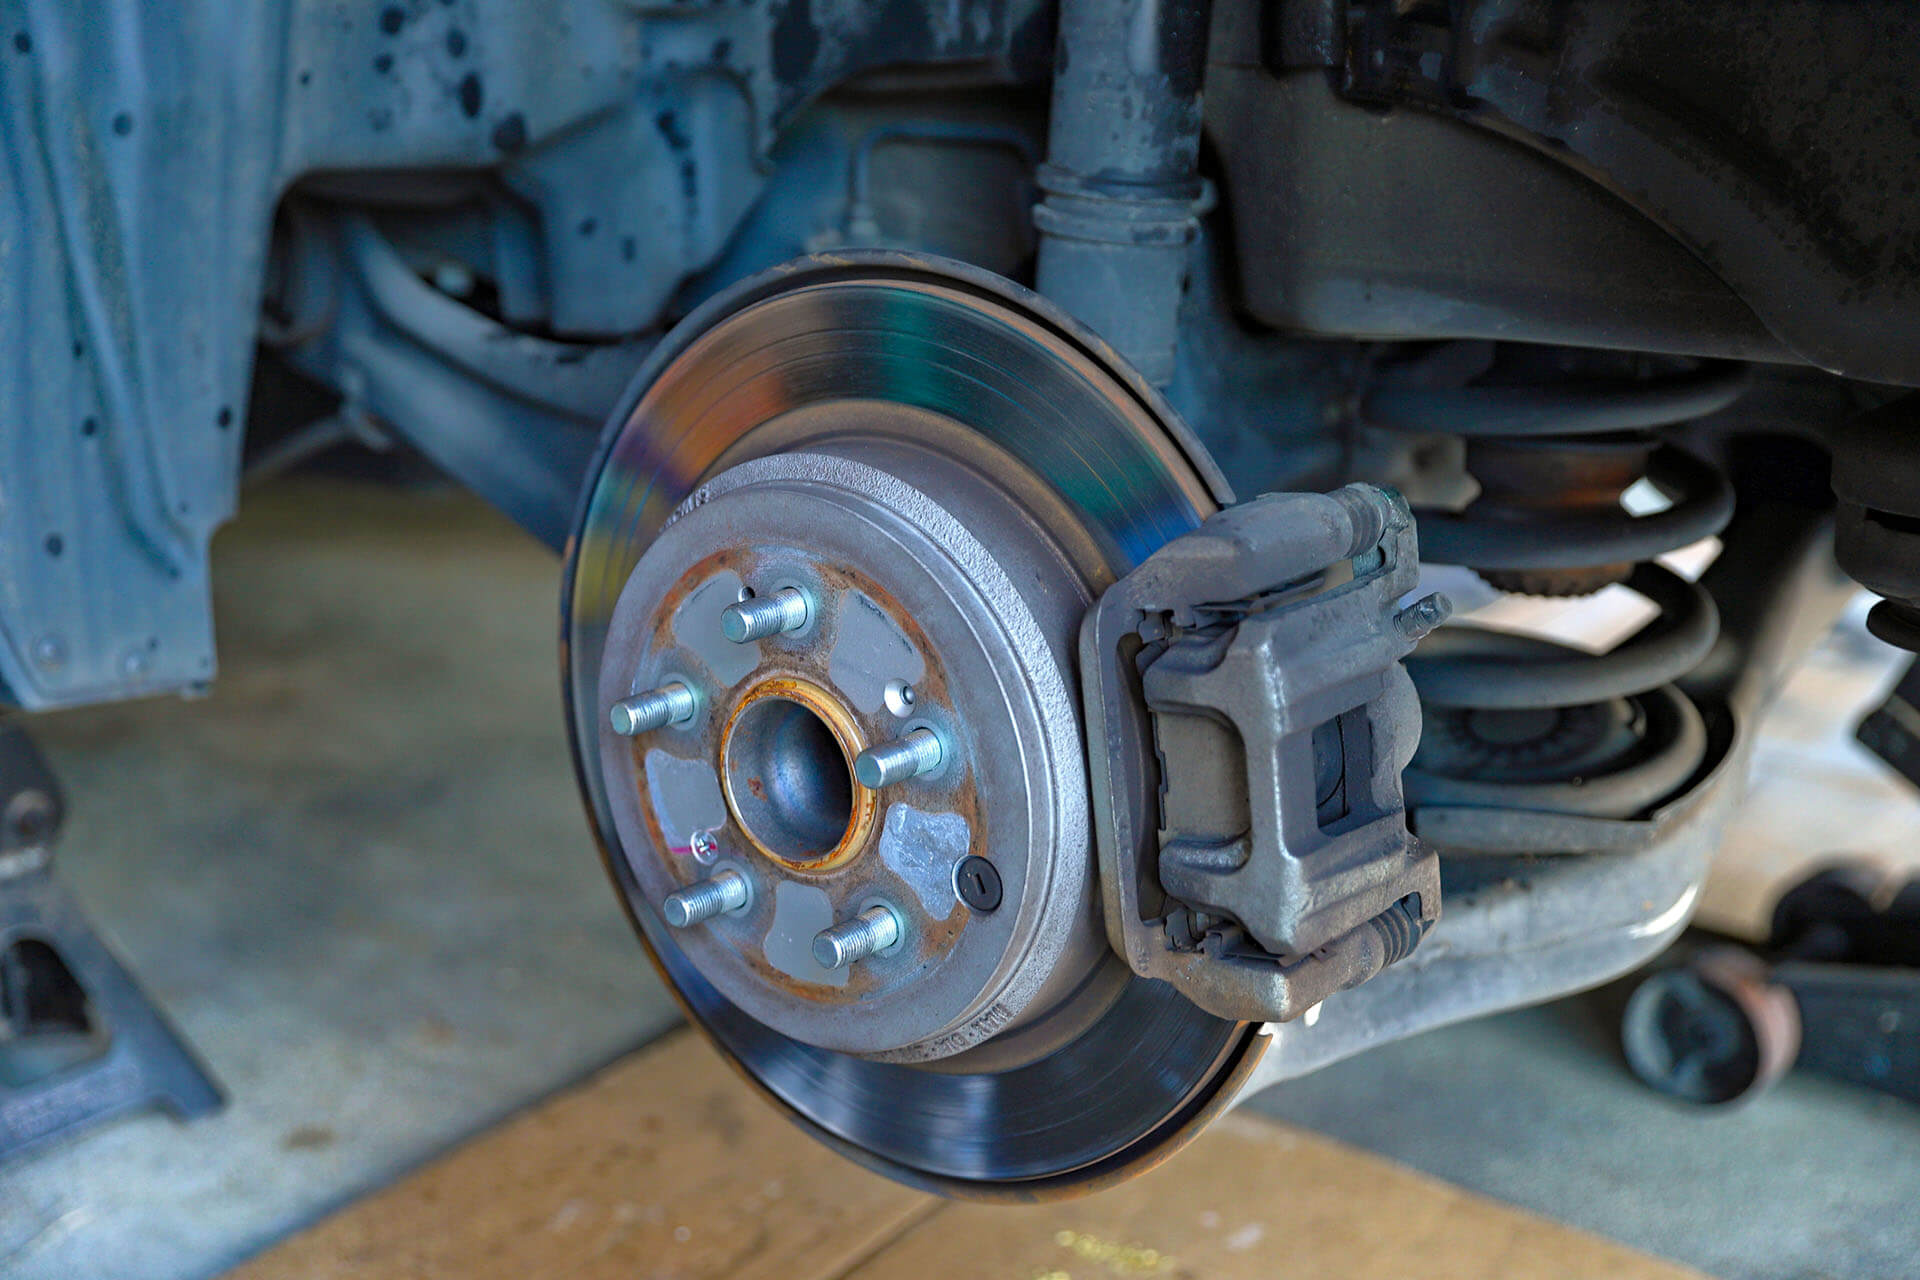 If your brakes are vibrating, or if they don't stop your vehicle as quick as they used to, it's time to get them looked at.